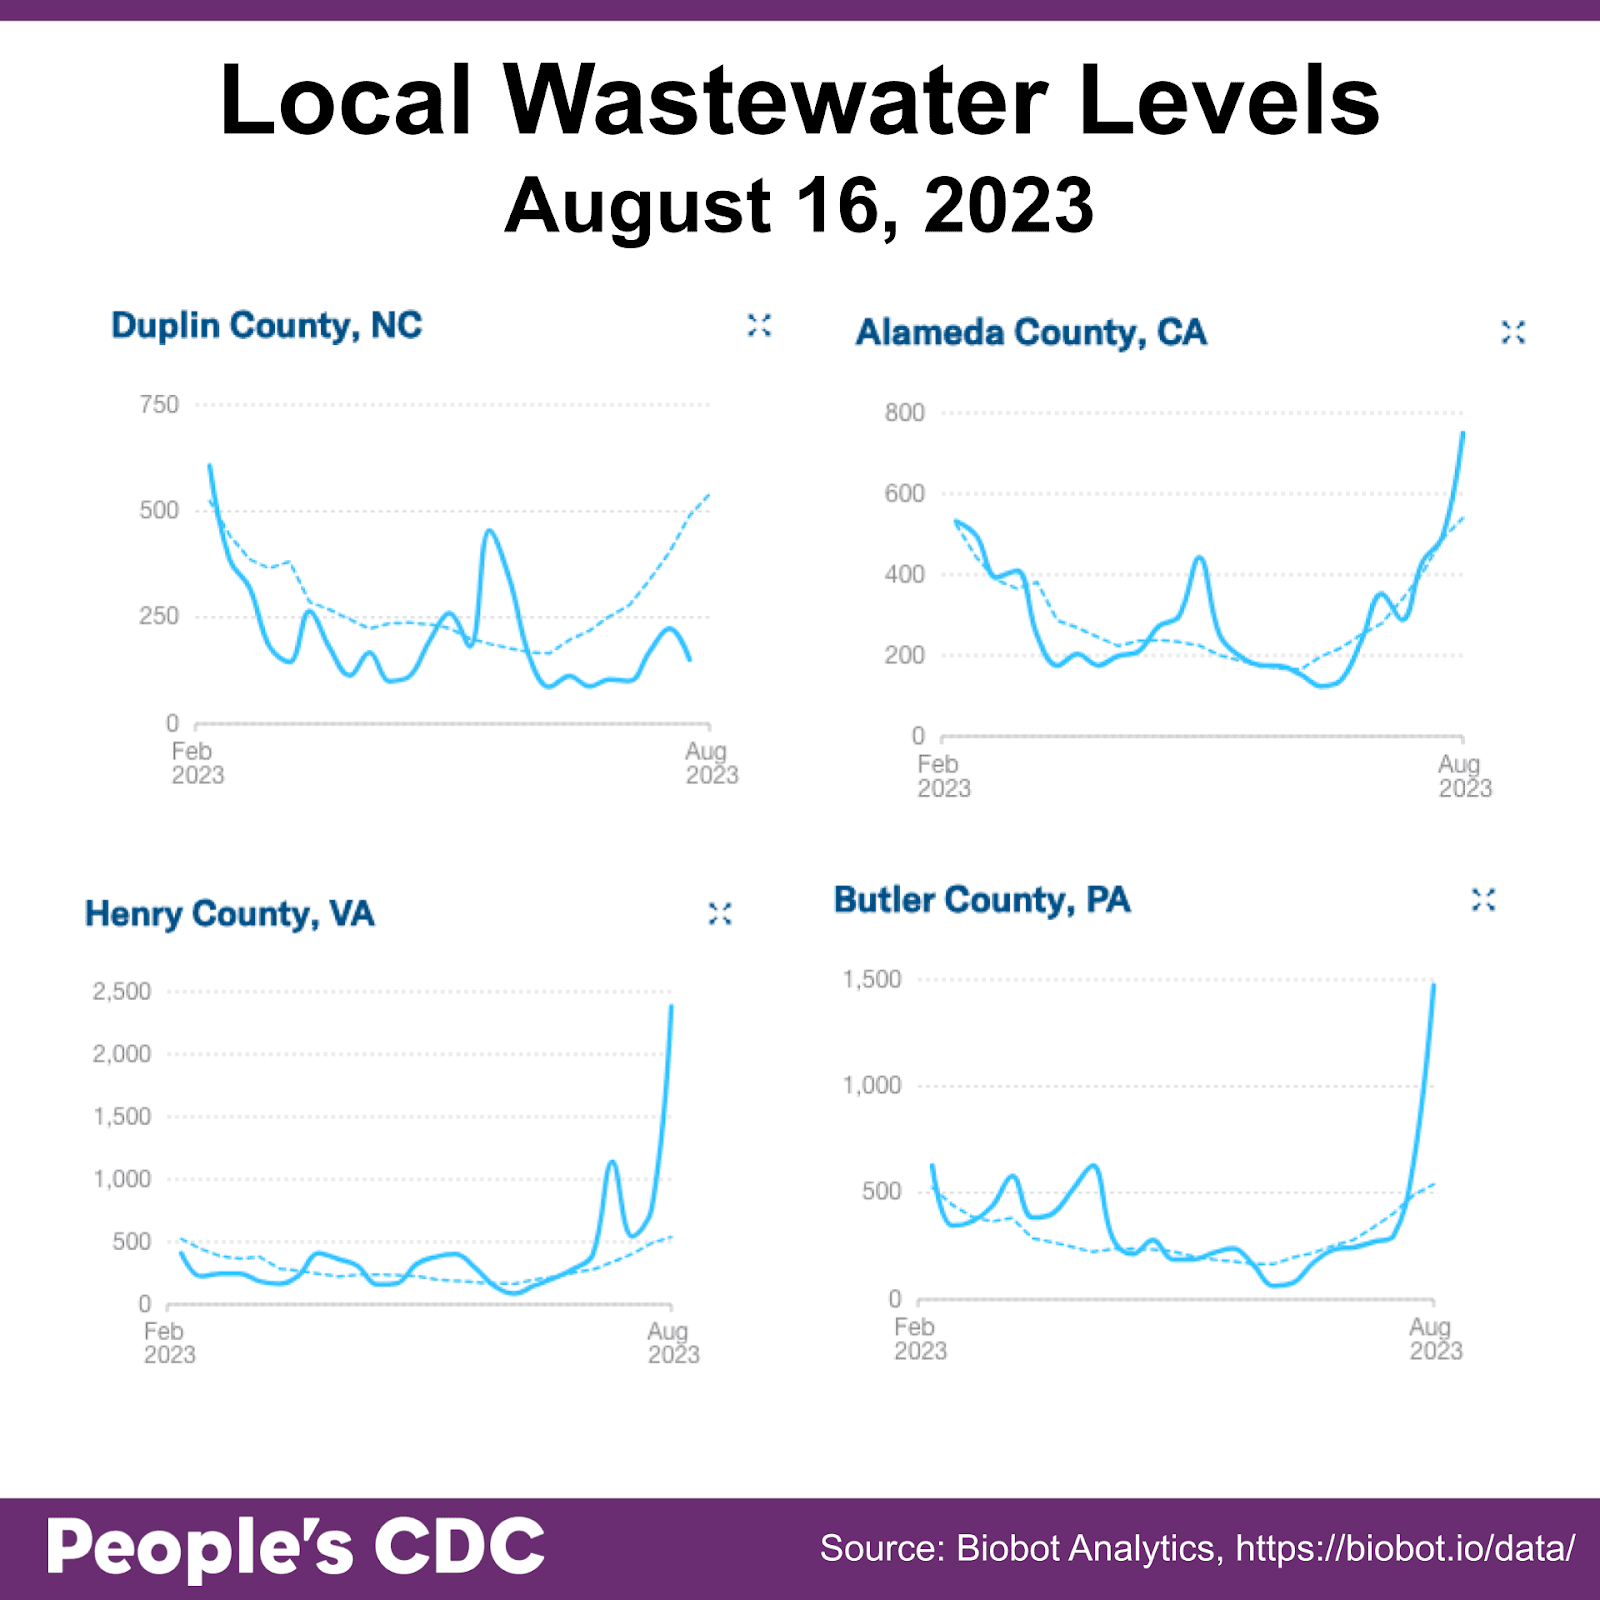 Title reads: “Local Wastewater Levels August 16, 2023.” Four line graphs show wastewater levels, a solid blue line, in four counties across the United States from February 2023 to August 2023. Each graph compares the county-level data to the national average, which is represented by a dotted blue line. The top left graph is titled “Duplin County, NC,” and shows a peak in May 2023, with current levels decreasing. The top right graph is titled “Alameda County, CA,” and shows a peak in May 2023, with current levels rising sharply. The lower left graph is titled “Henry County, VA,” and shows lower levels from February 2023 to August 2023, with current levels rising sharply. The lower right graph is titled “Butler County, PA,” with peaks in March 2023 and April 2023, with current levels rising sharply. 